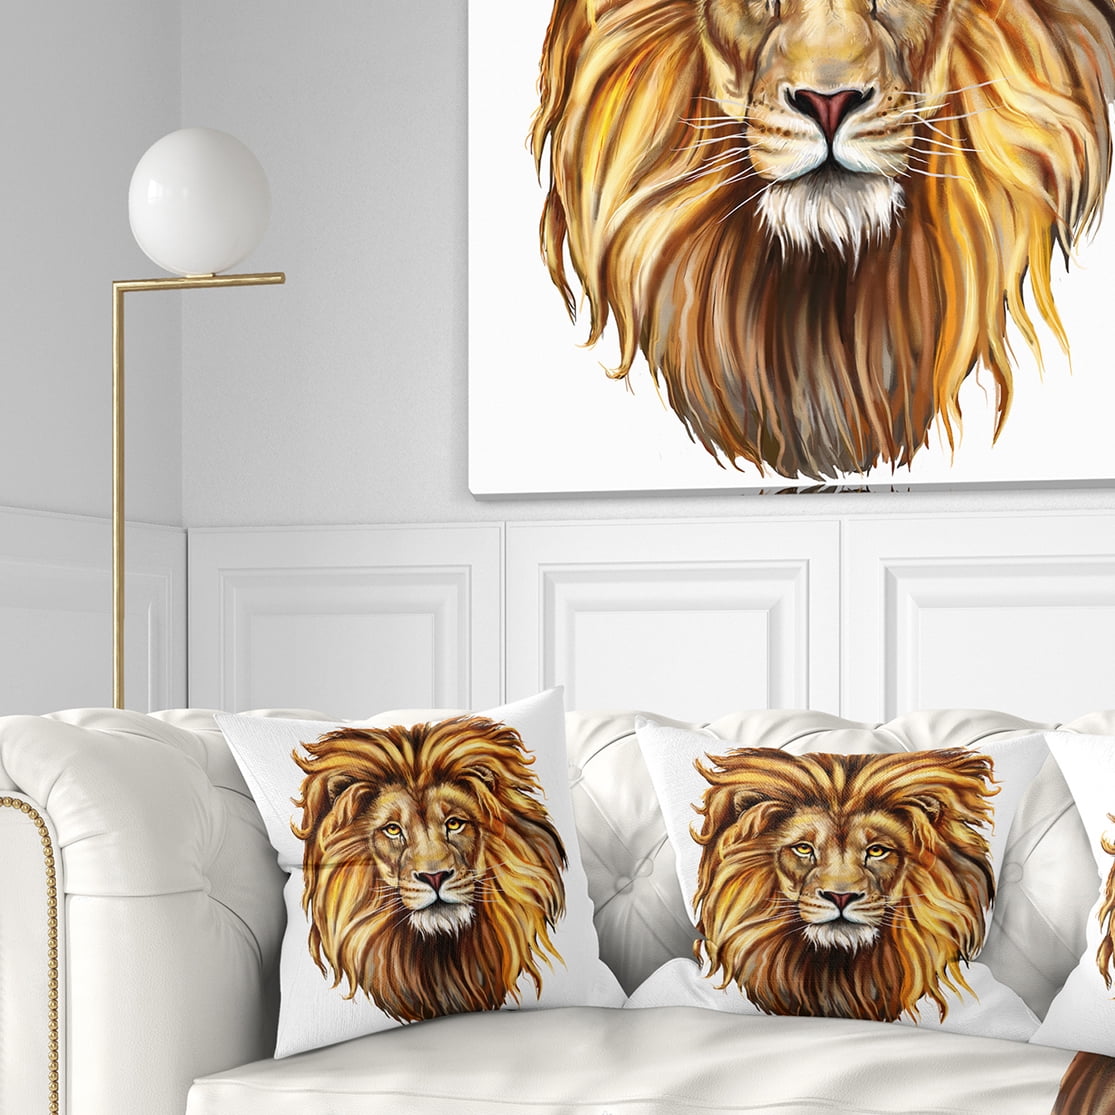 Aslan Great Lion Photographic Print Duvet Cover and Pillowcase Set King size 